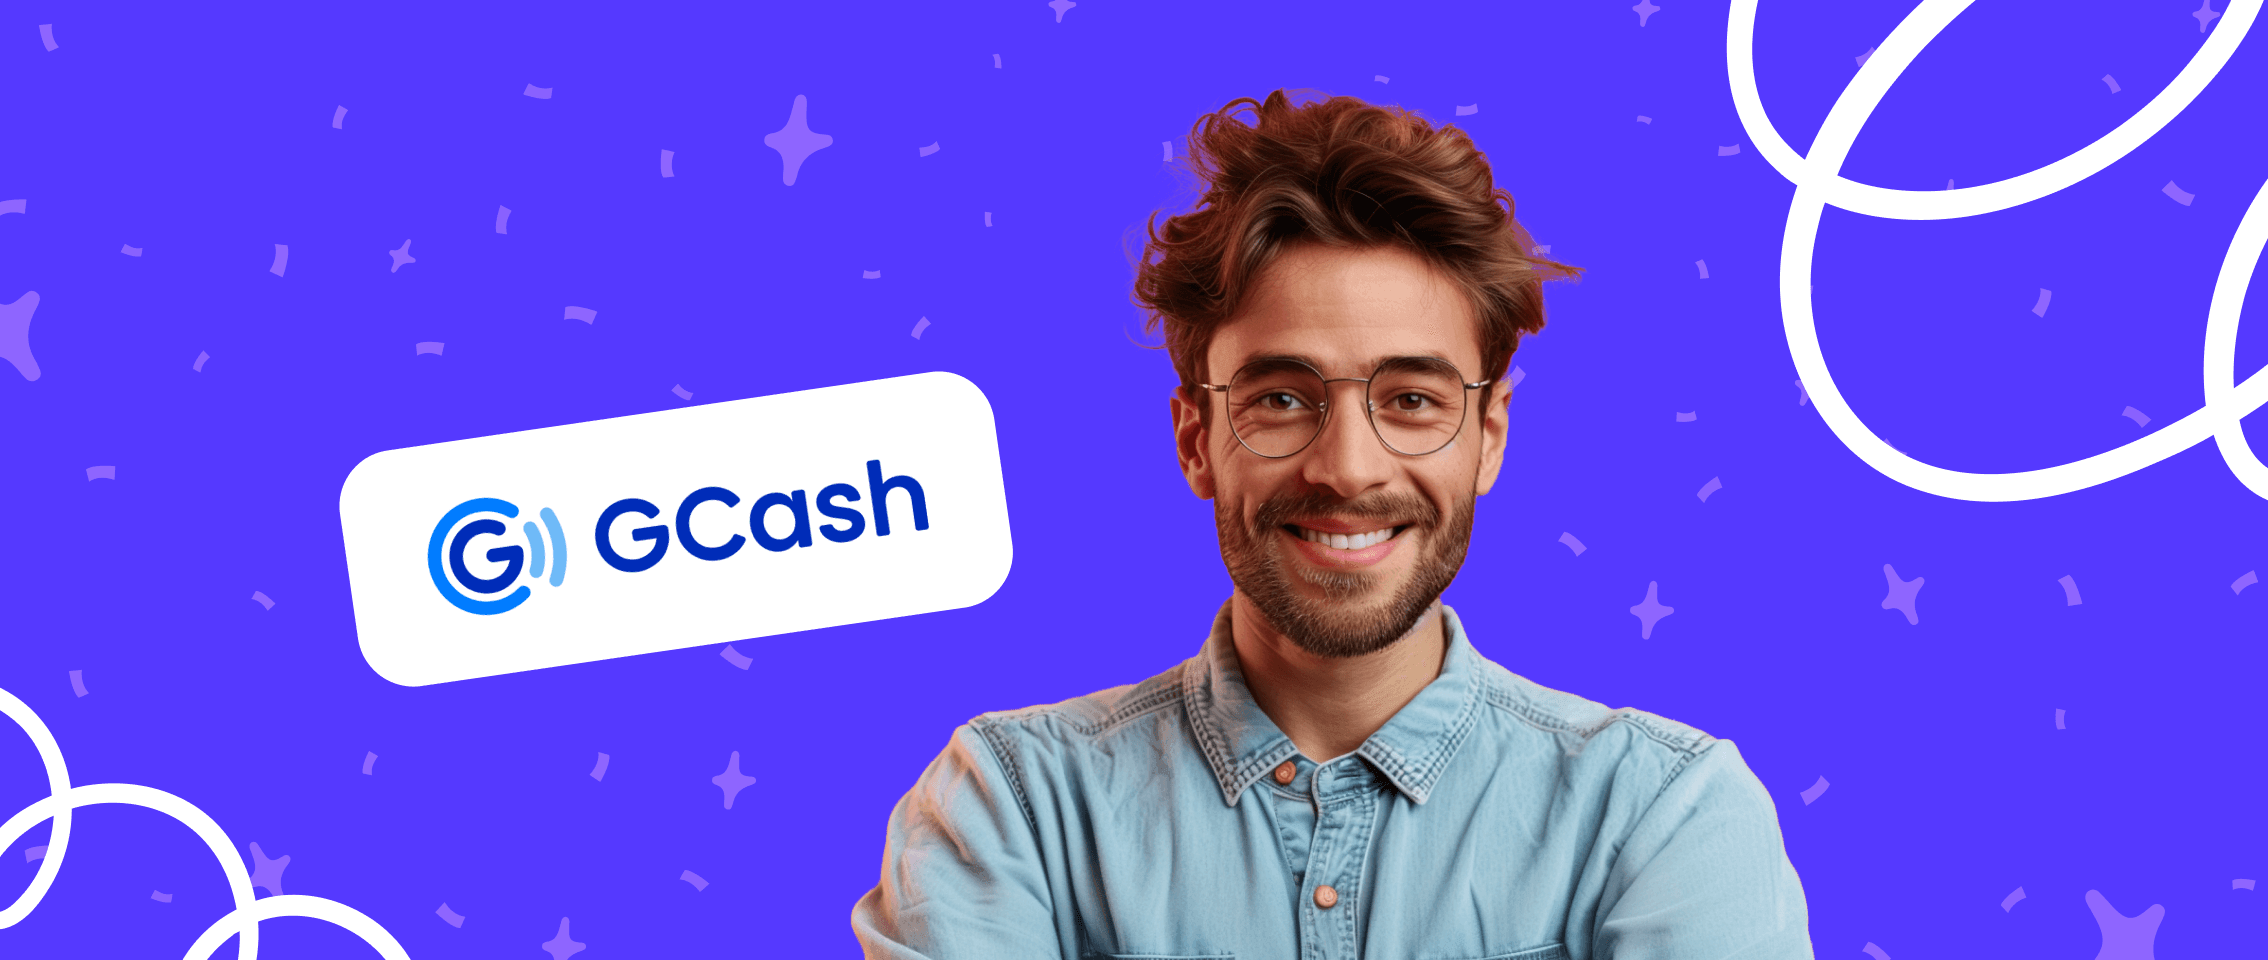 Money transfers to GCash are now available at Profee